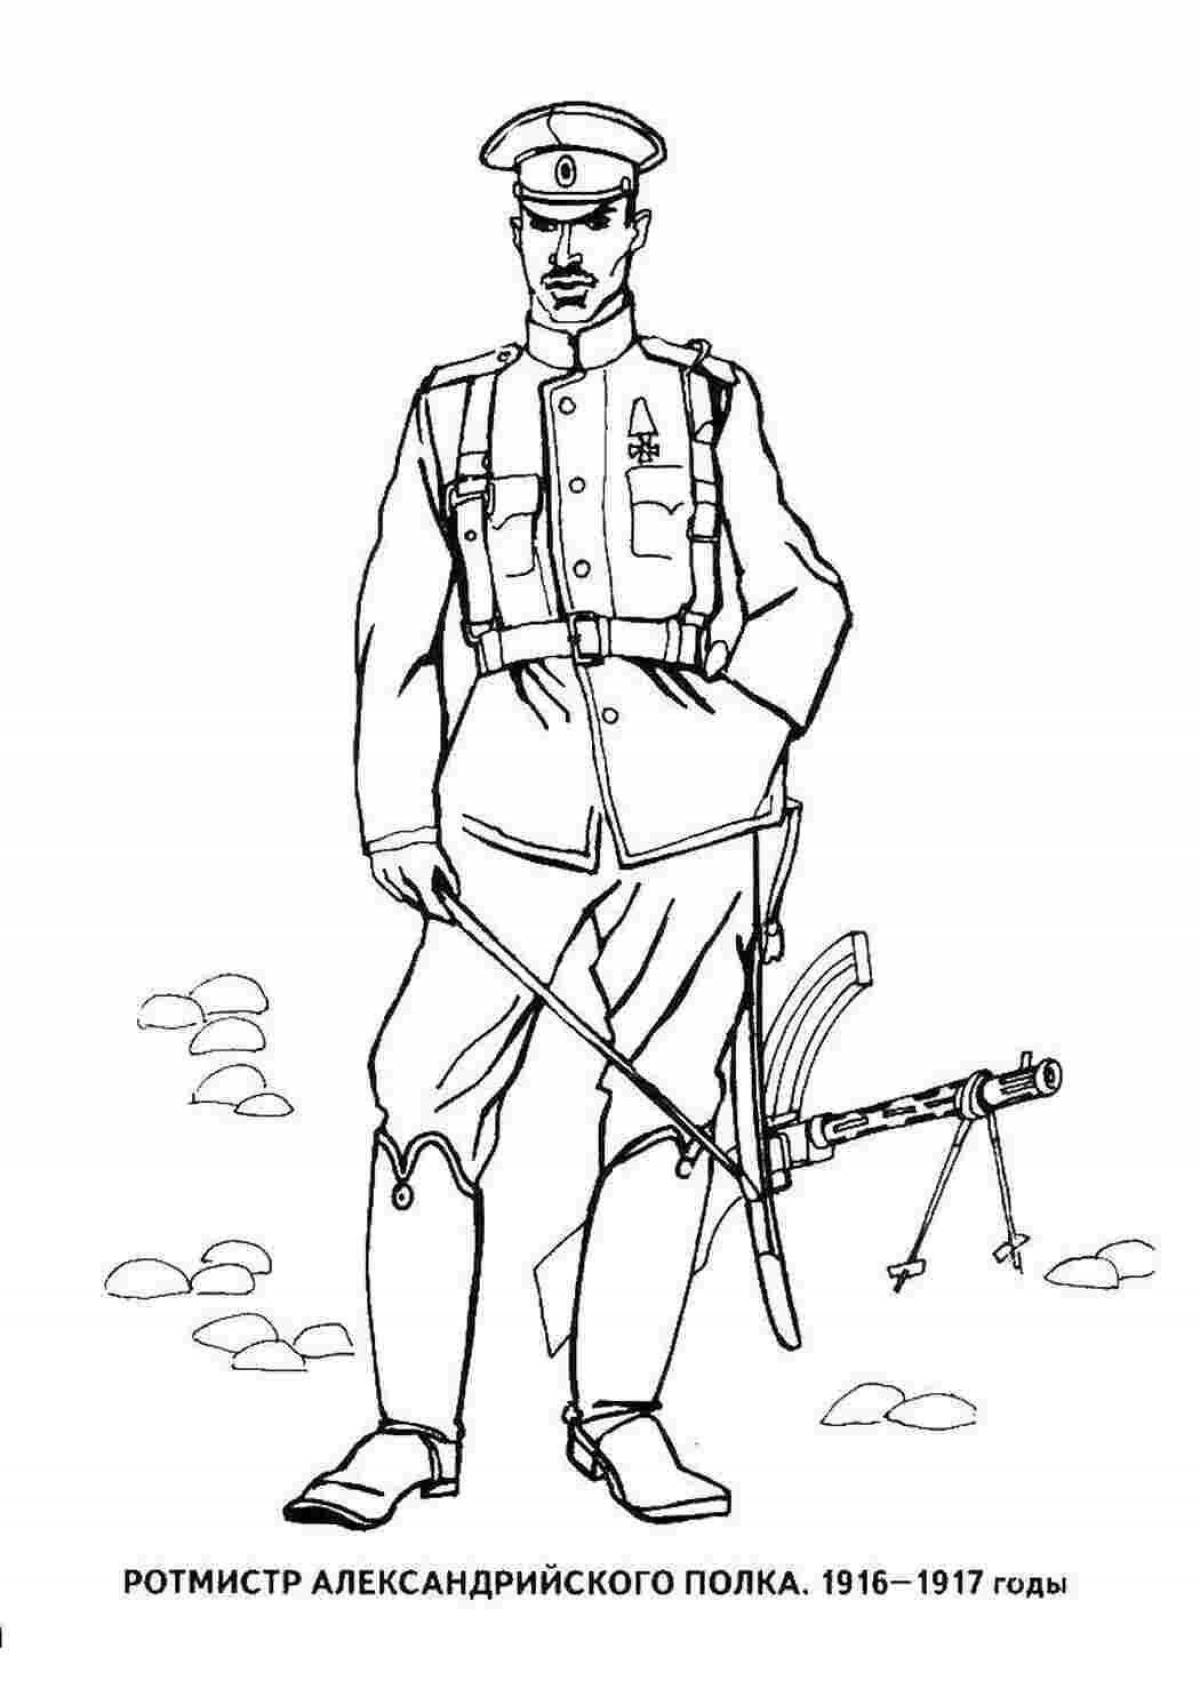 Unrelenting coloring page is on guard